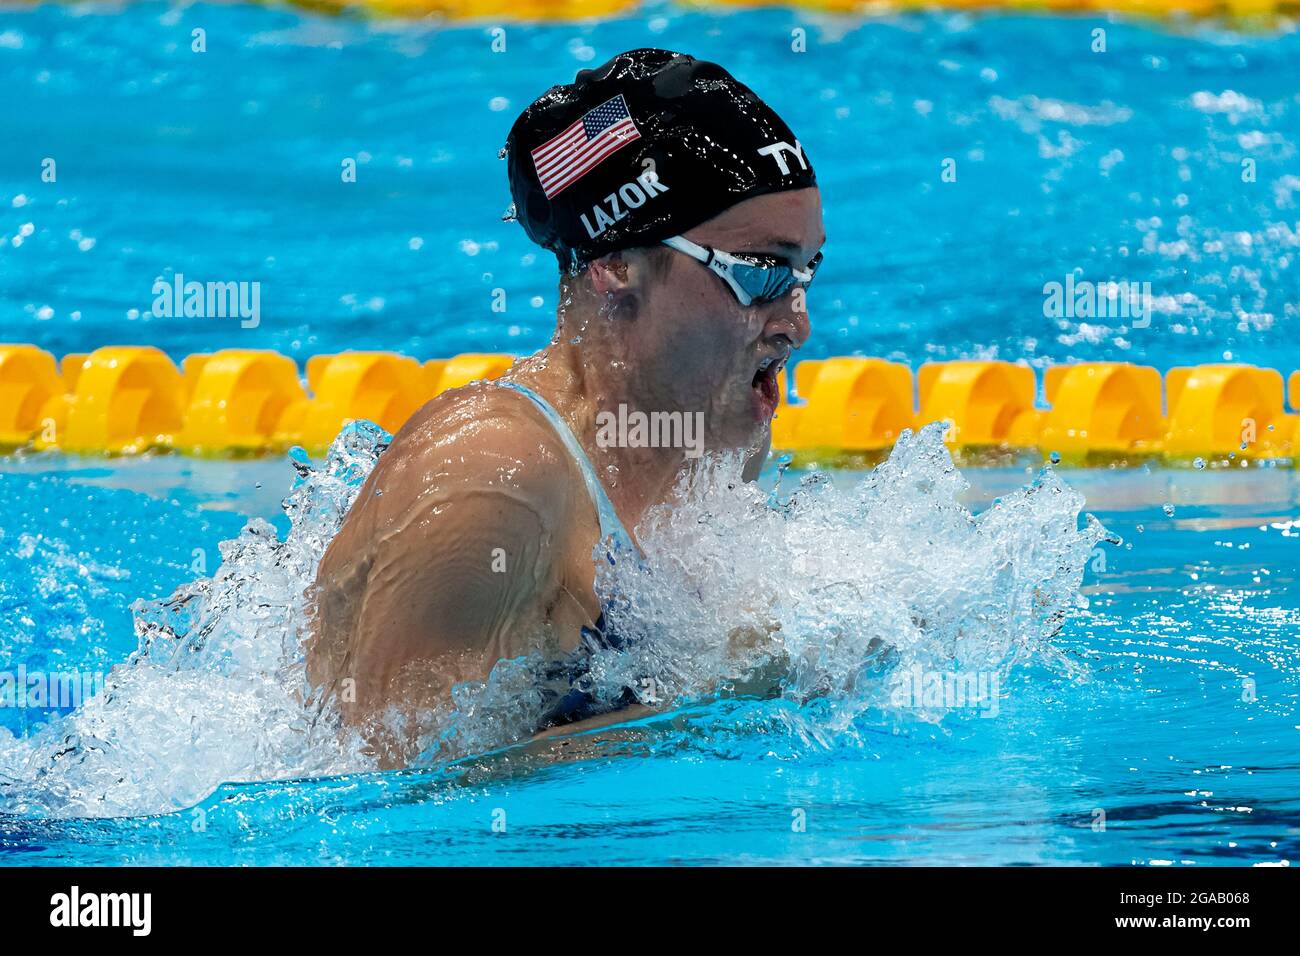 Tokyo, Japan. 30th July, 2021. TOKYO, JAPAN - JULY 30: Annie Lazor of United States competing in the women 200m Breaststroke final during the Tokyo 2020 Olympic Games at the Tokyo Aquatics Centre on July 30, 2021 in Tokyo, Japan (Photo by Giorgio Scala/Insidefoto/Deepbluemedia) Credit: insidefoto srl/Alamy Live News Stock Photo